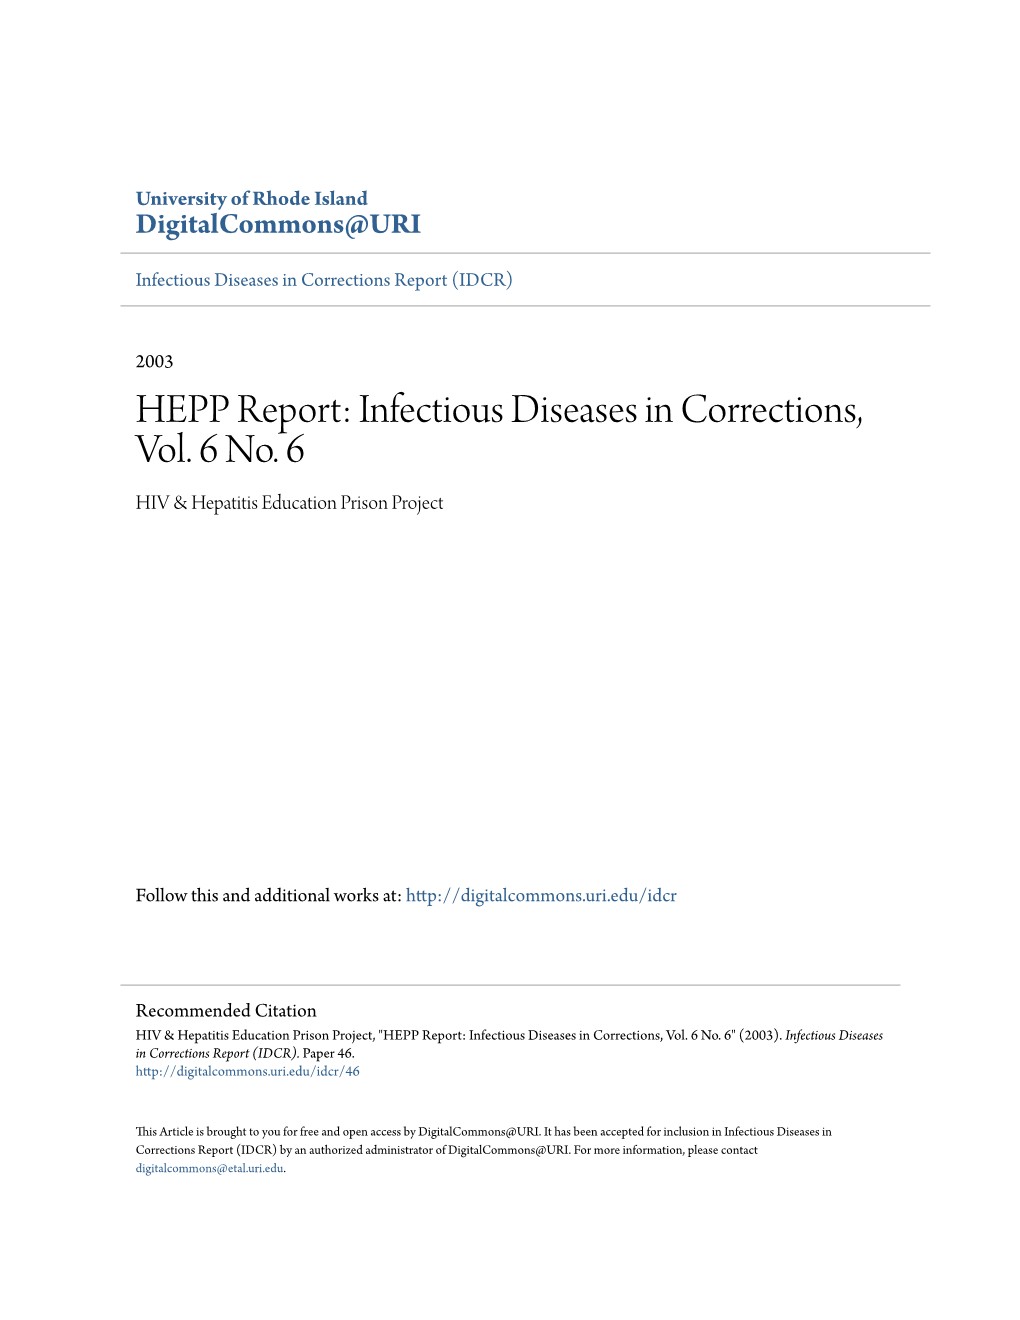 HEPP Report: Infectious Diseases in Corrections, Vol. 6 No. 6 HIV & Hepatitis Education Prison Project